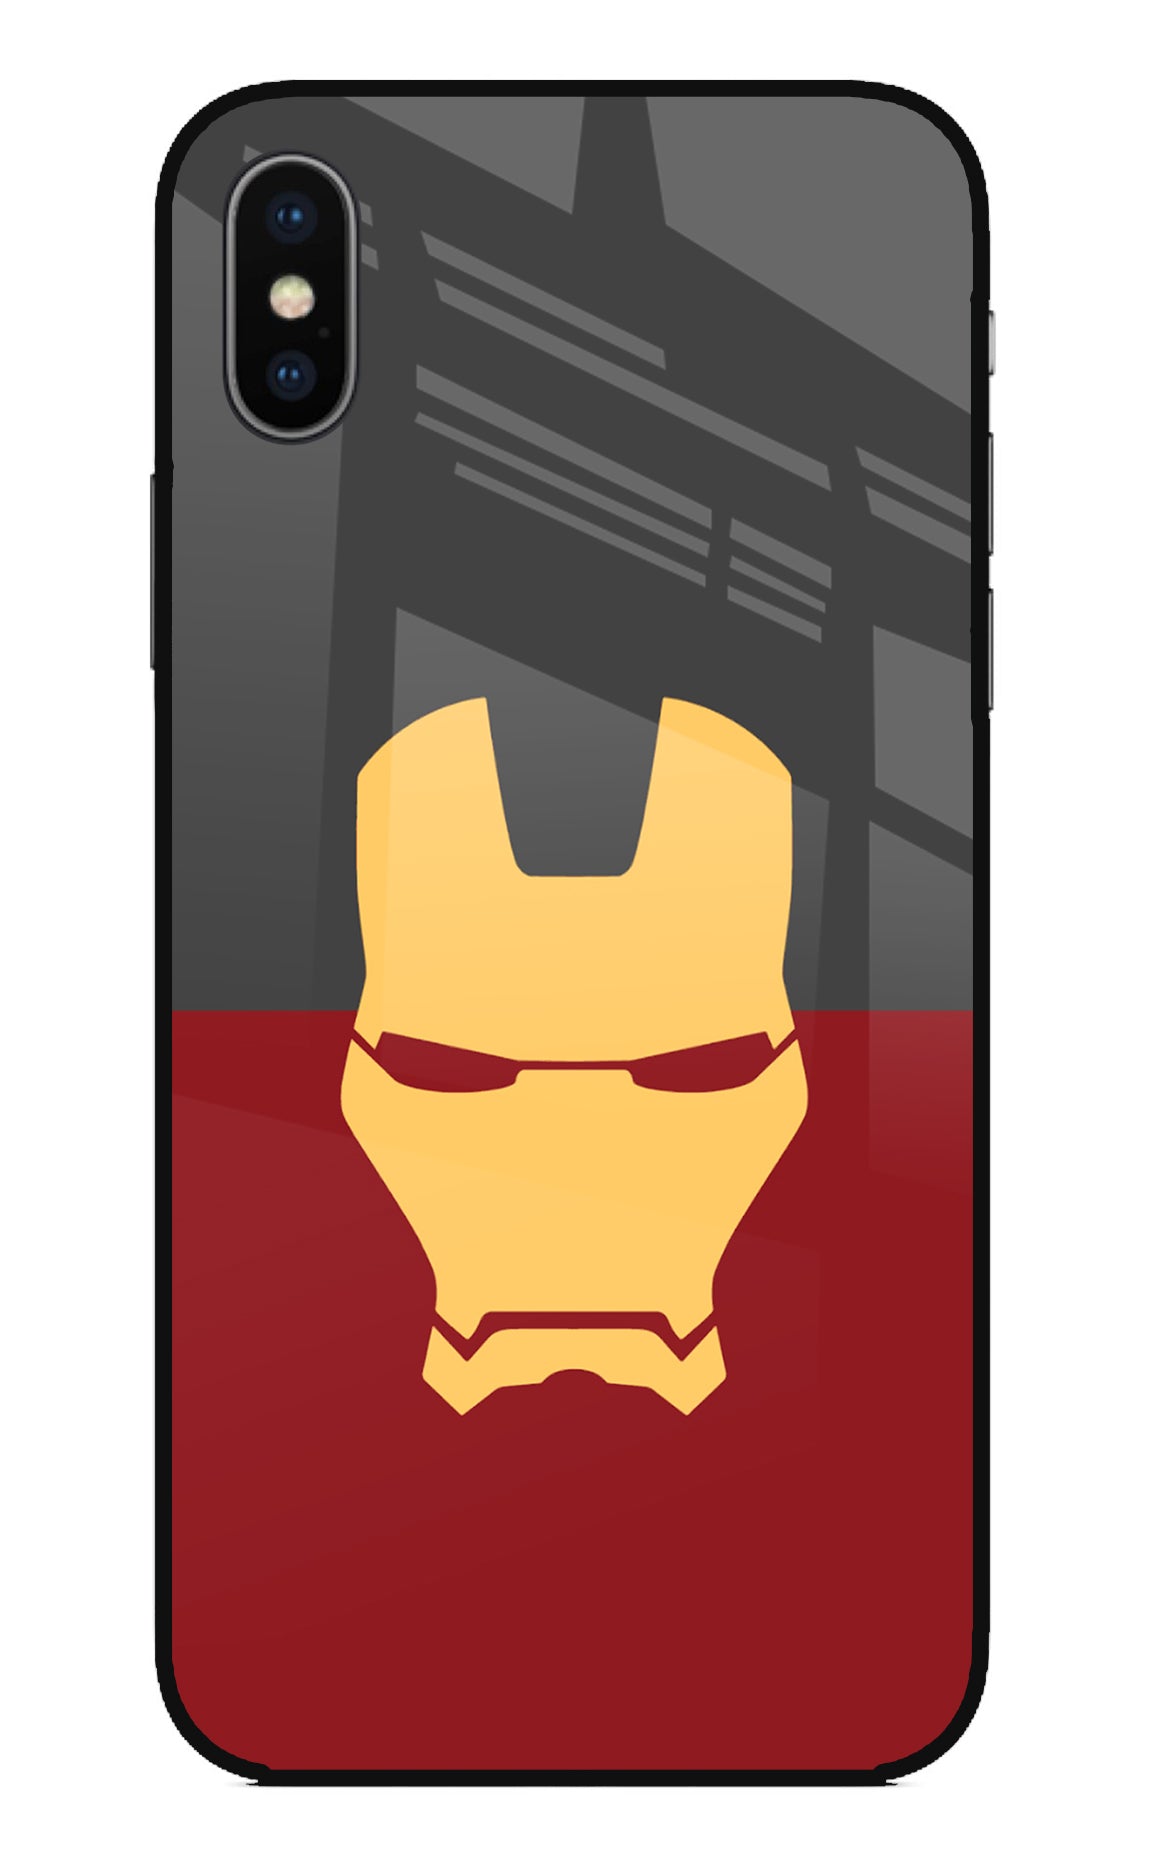 Ironman iPhone X Back Cover